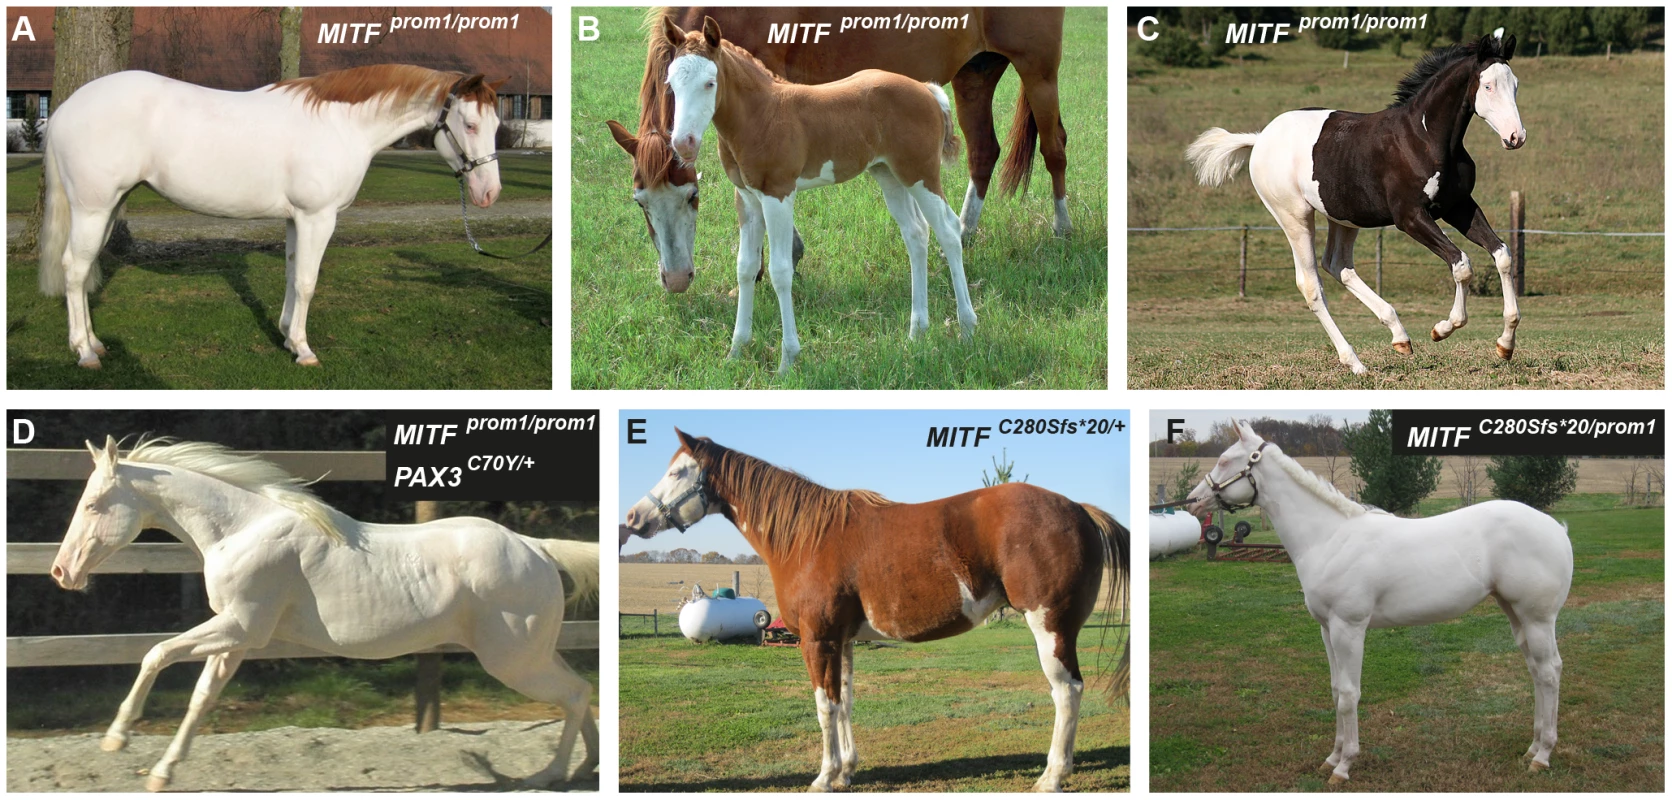 Phenotypes of horses with different combinations of splashed white alleles.